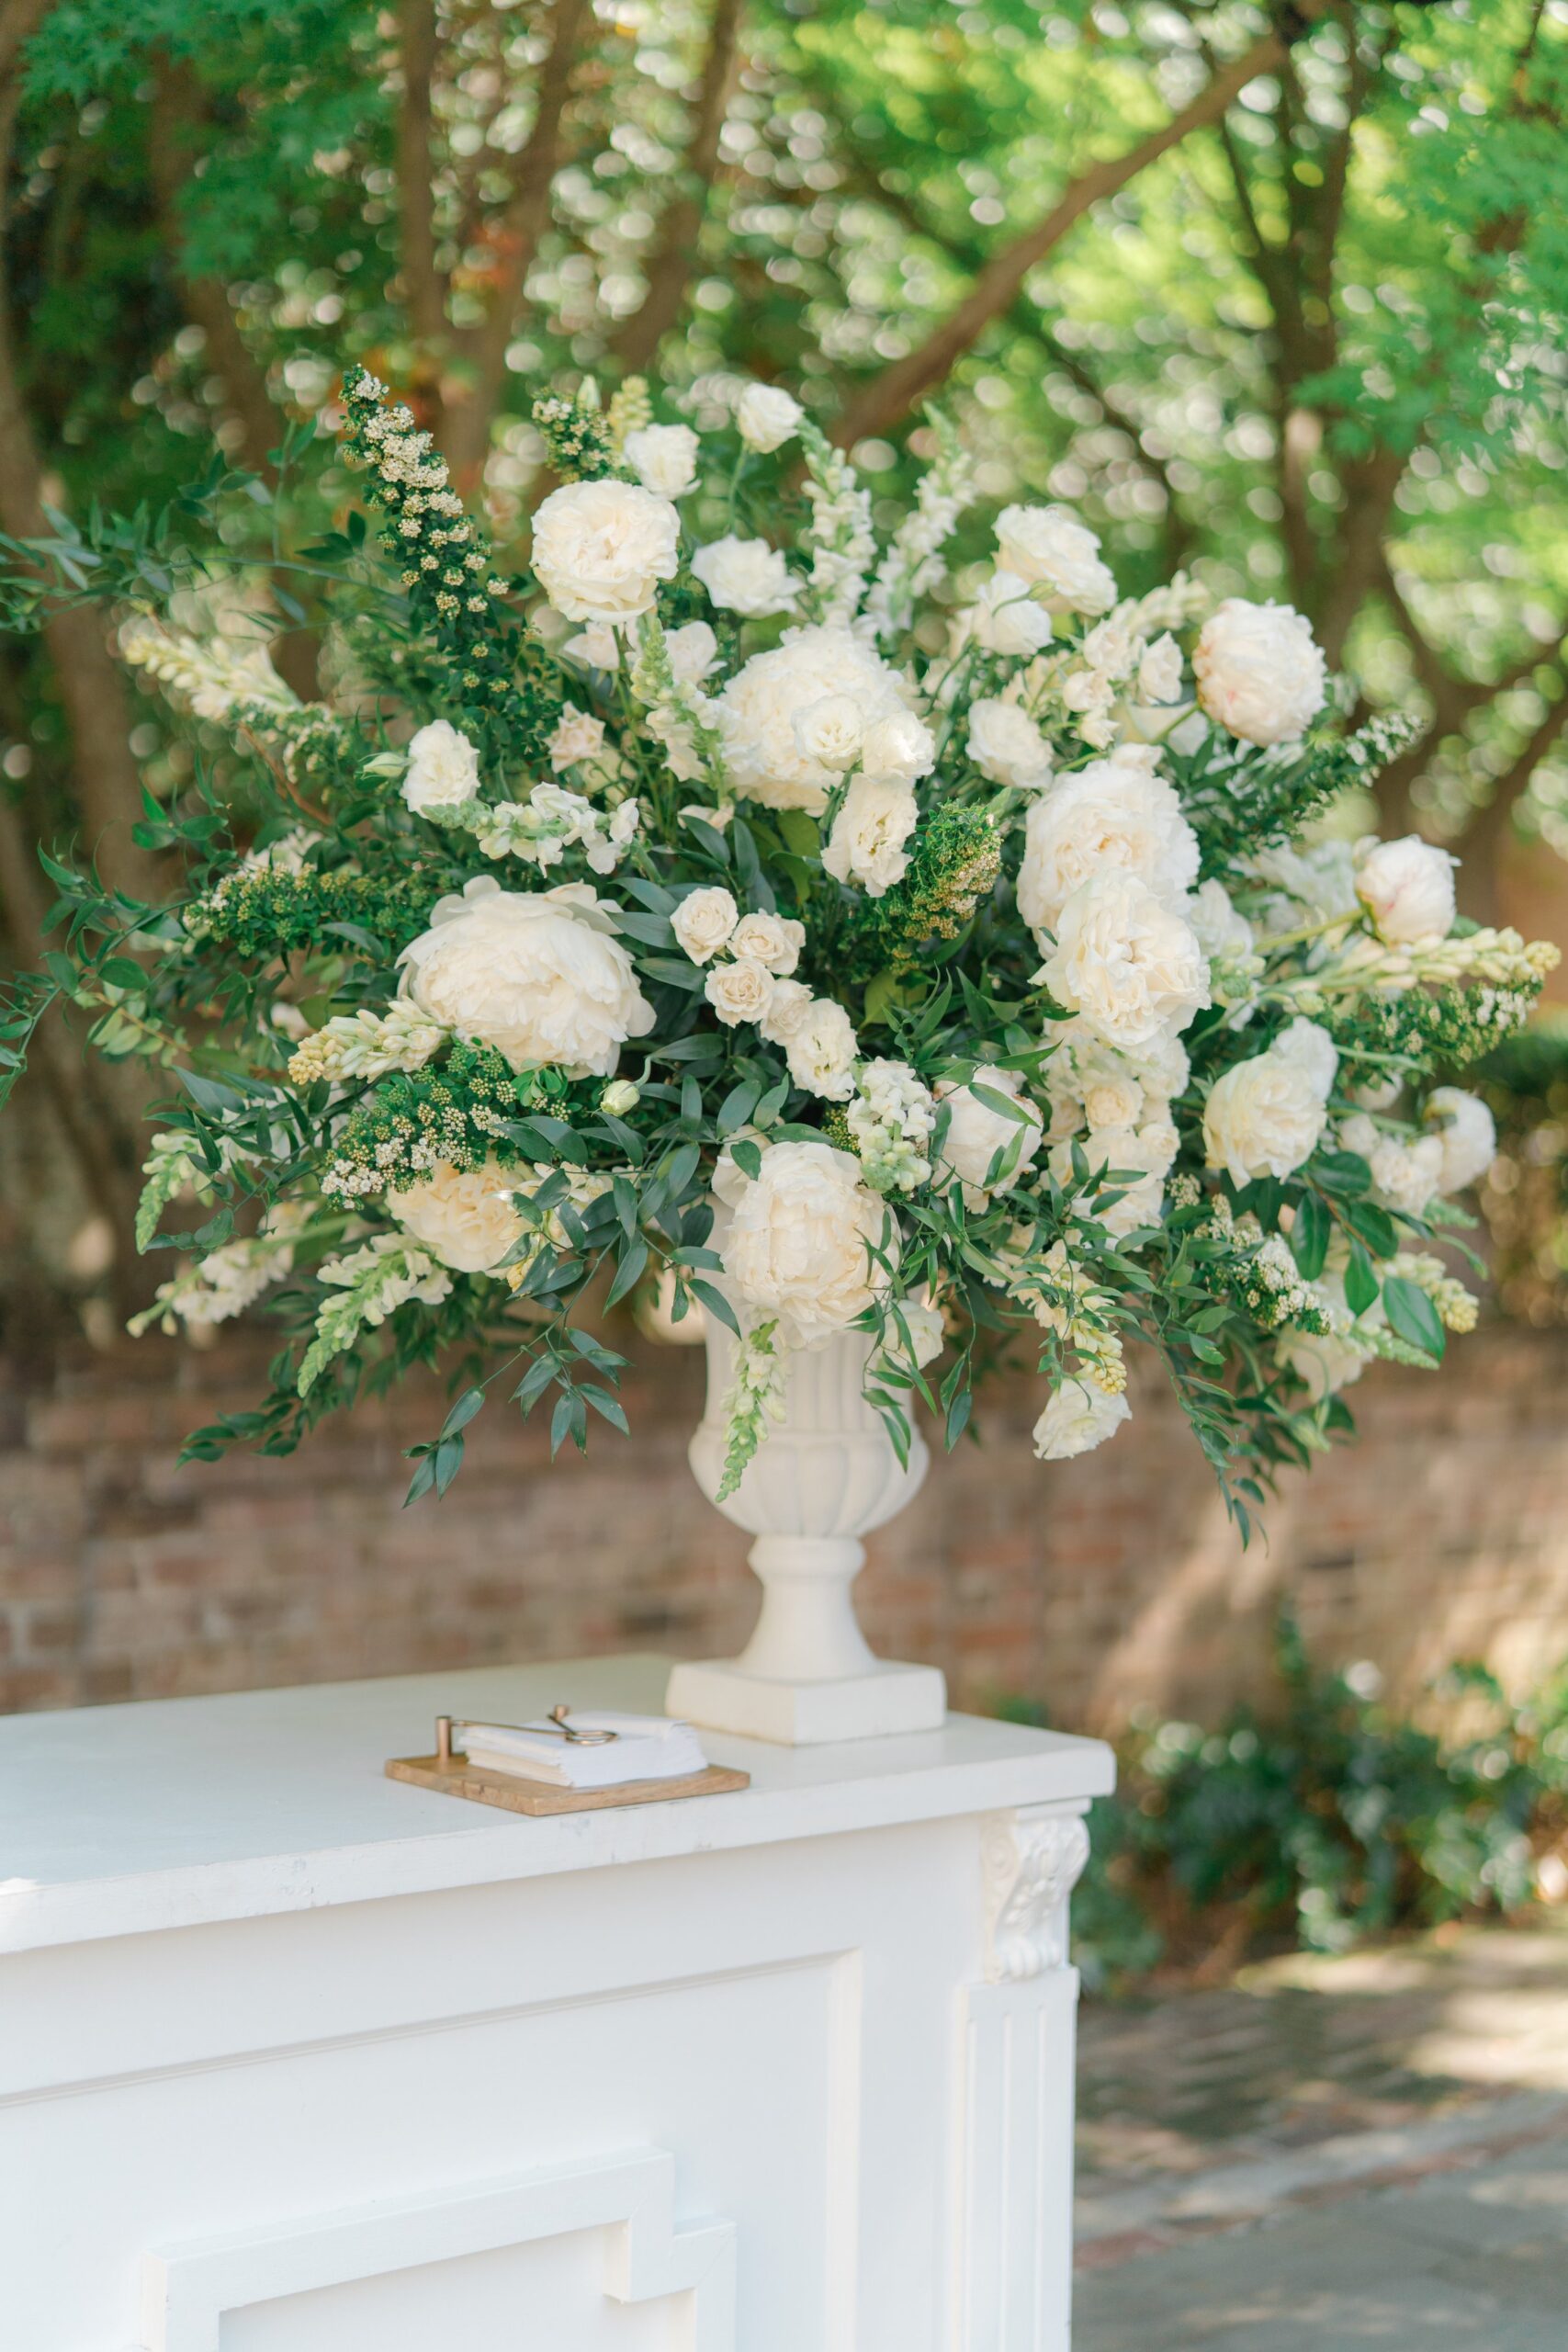 Oversized white and green pedestal flowers on reception bar.